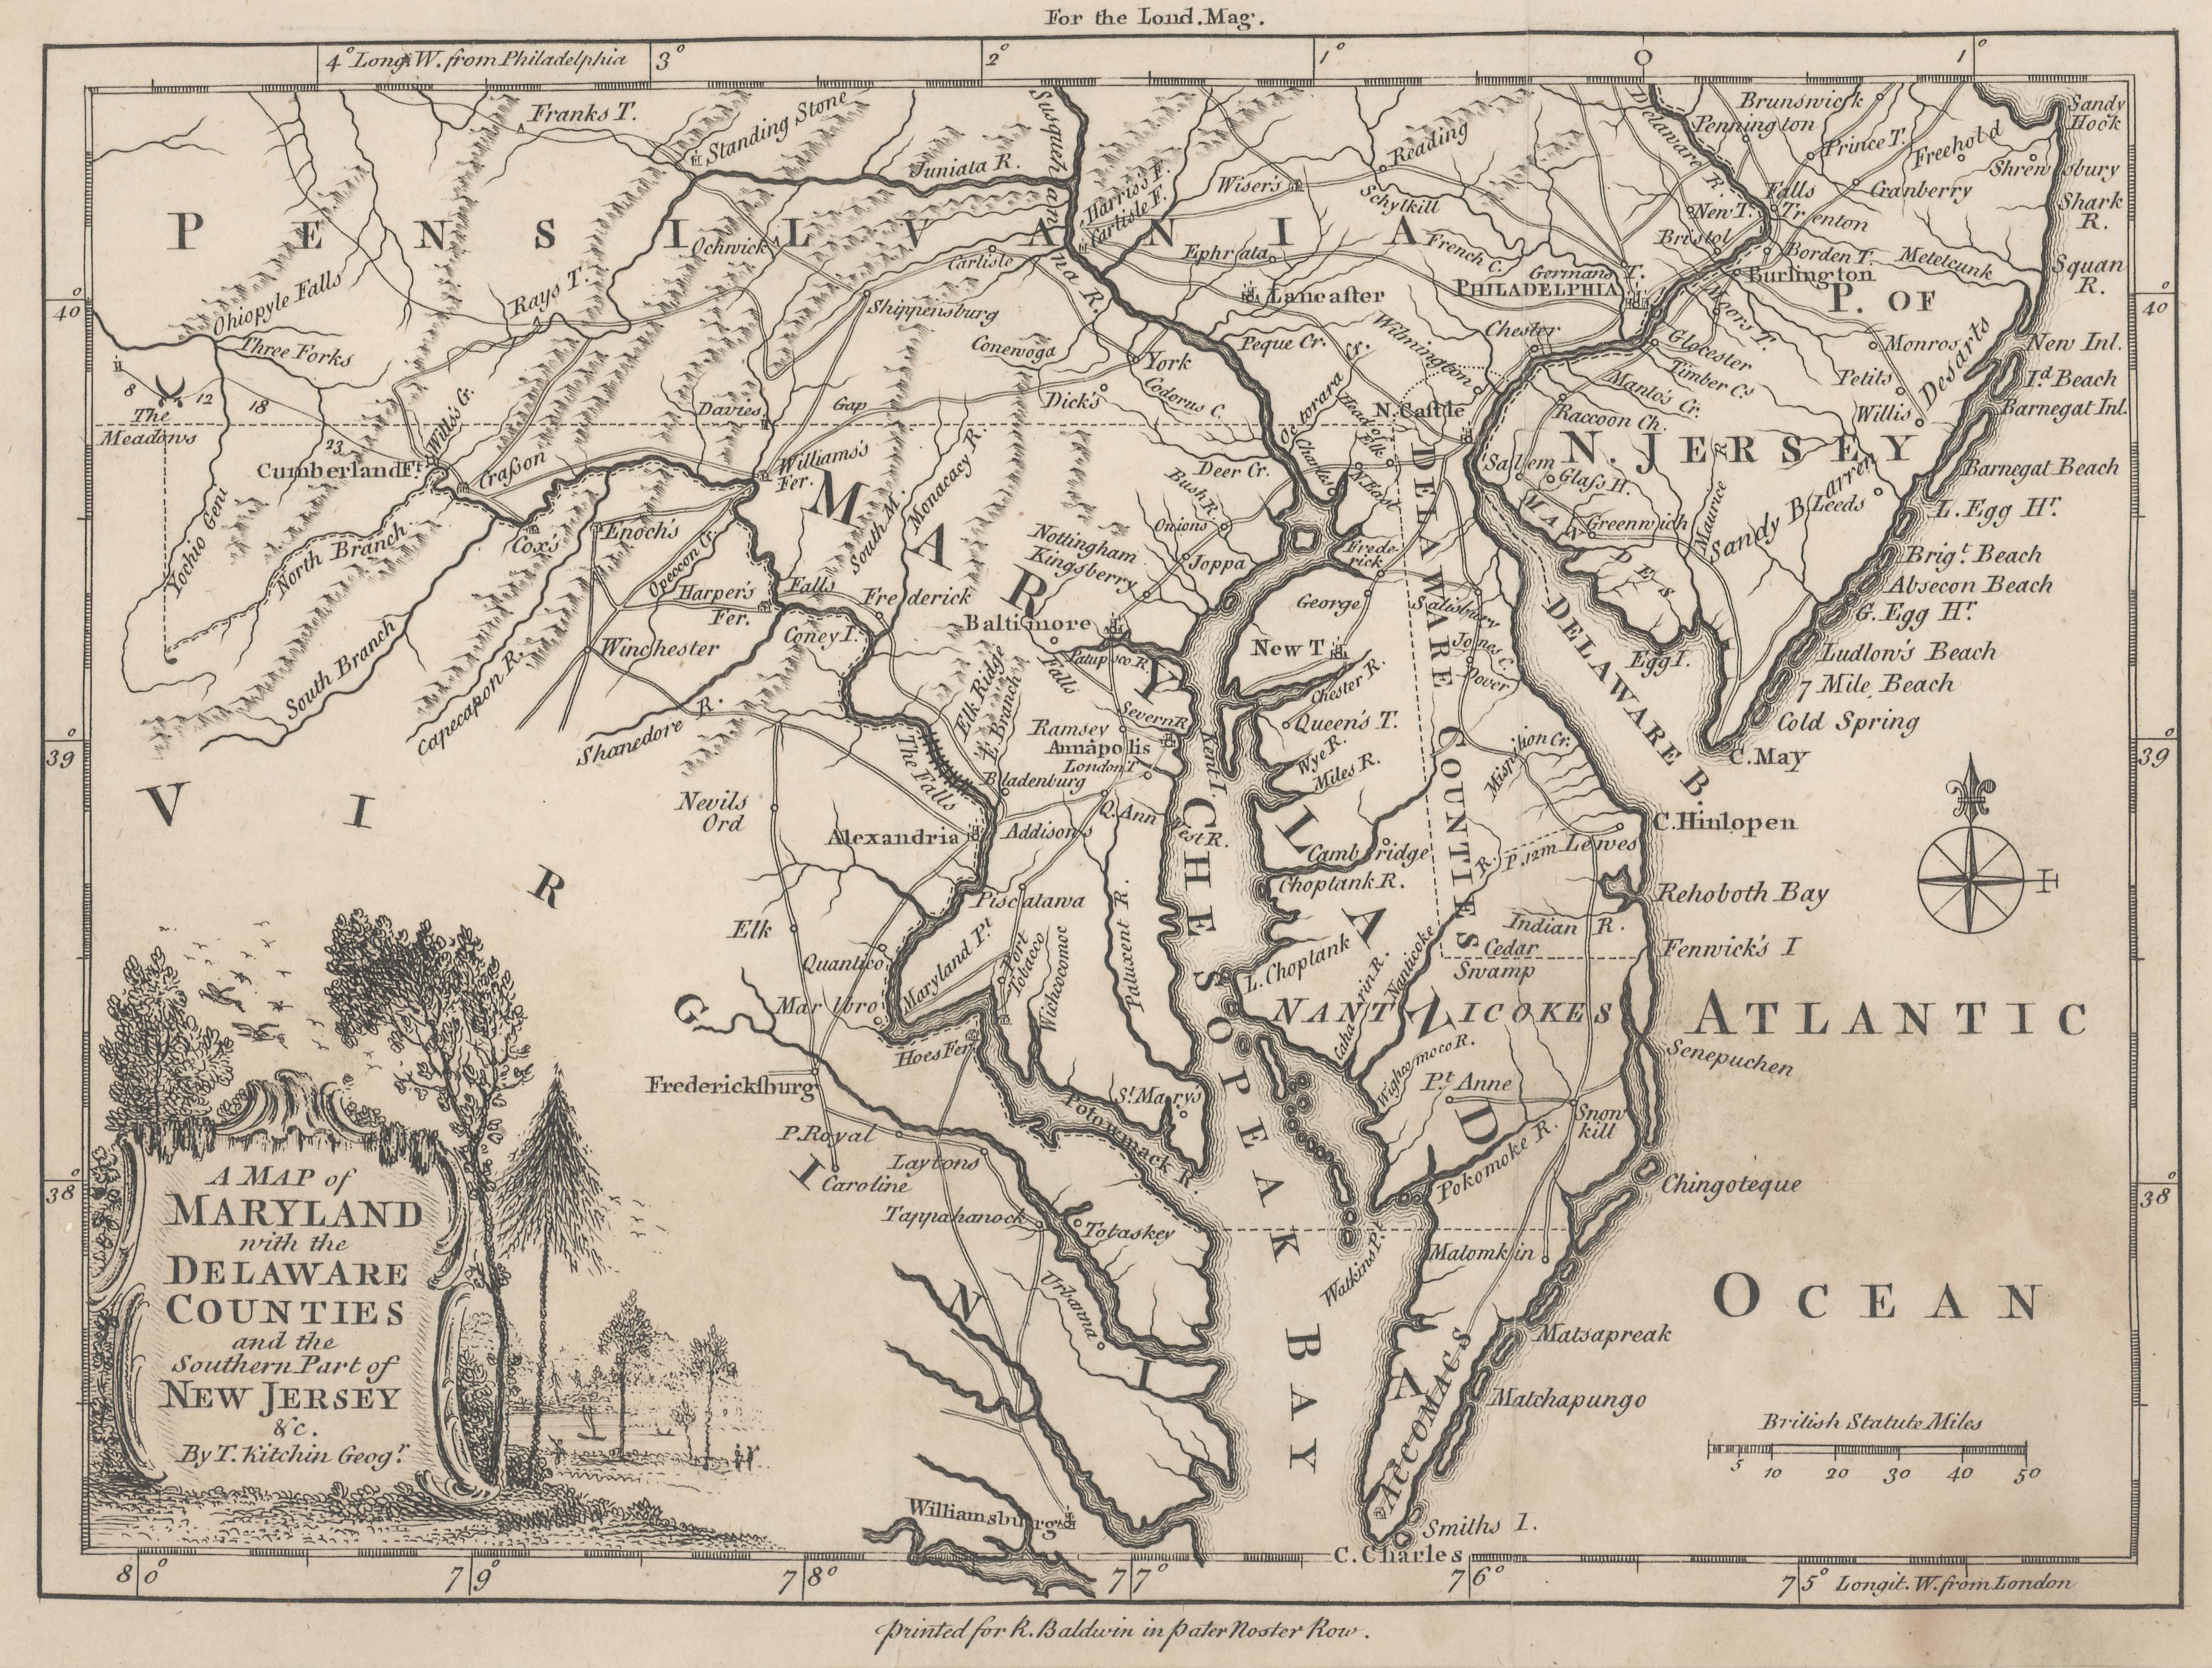 1757 Map of Maryland, Delaware Counties and the Southern part of New Jersey - Print by Thomas Kitchin